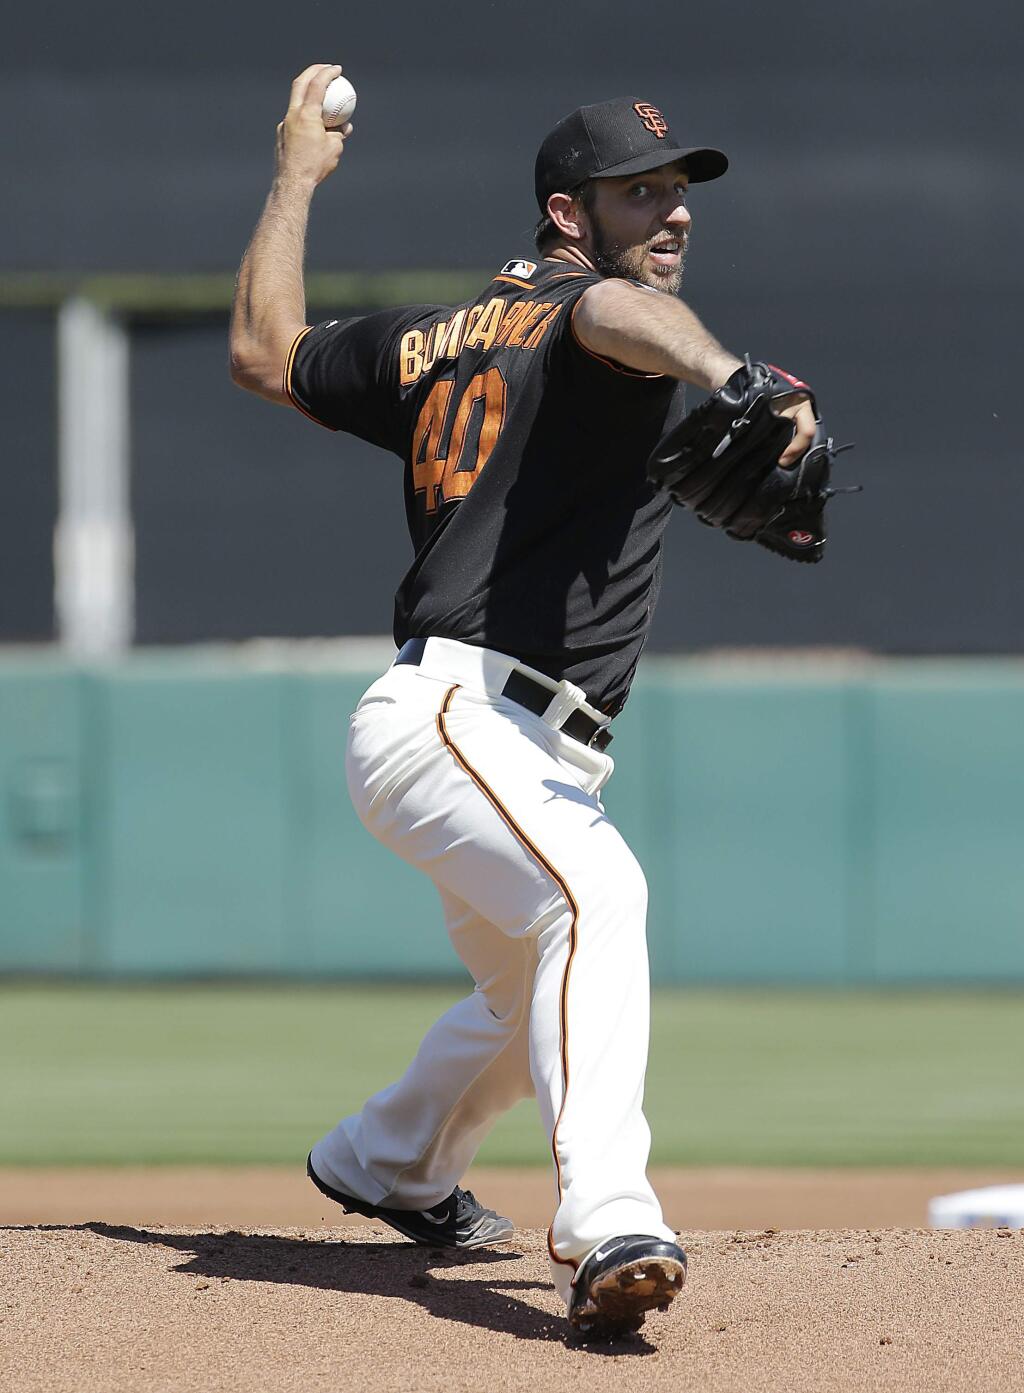 San Francisco Giants starting pitcher Madison Bumgarner throws before the first inning of a spring training baseball game against the Oakland Athletics in Scottsdale, Ariz., Saturday, March 19, 2016. (AP Photo/Jeff Chiu)